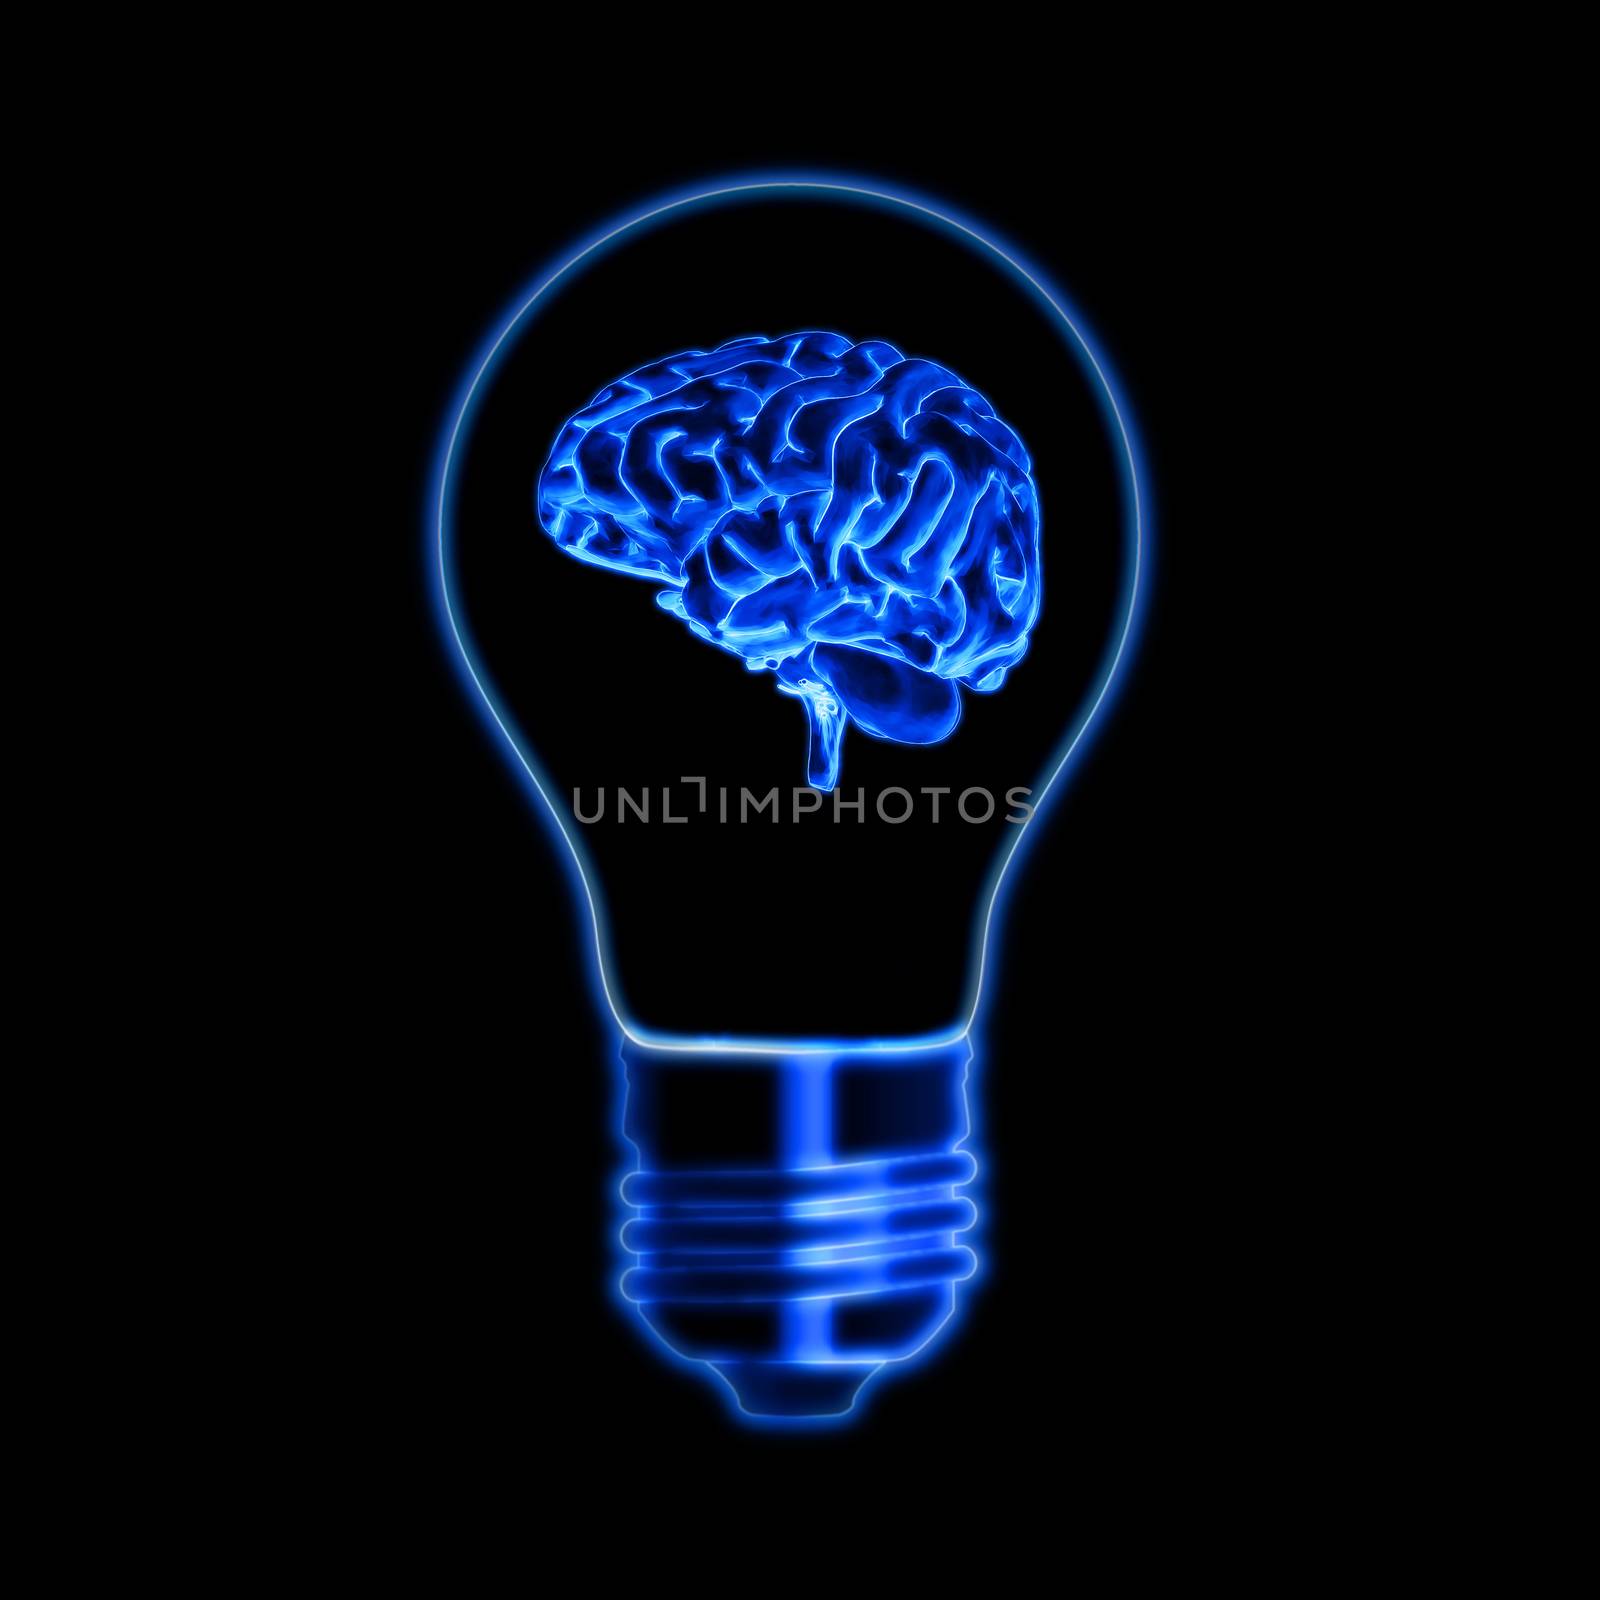 light bulb sign with brain - shining symbol over black background, creative concept web icon